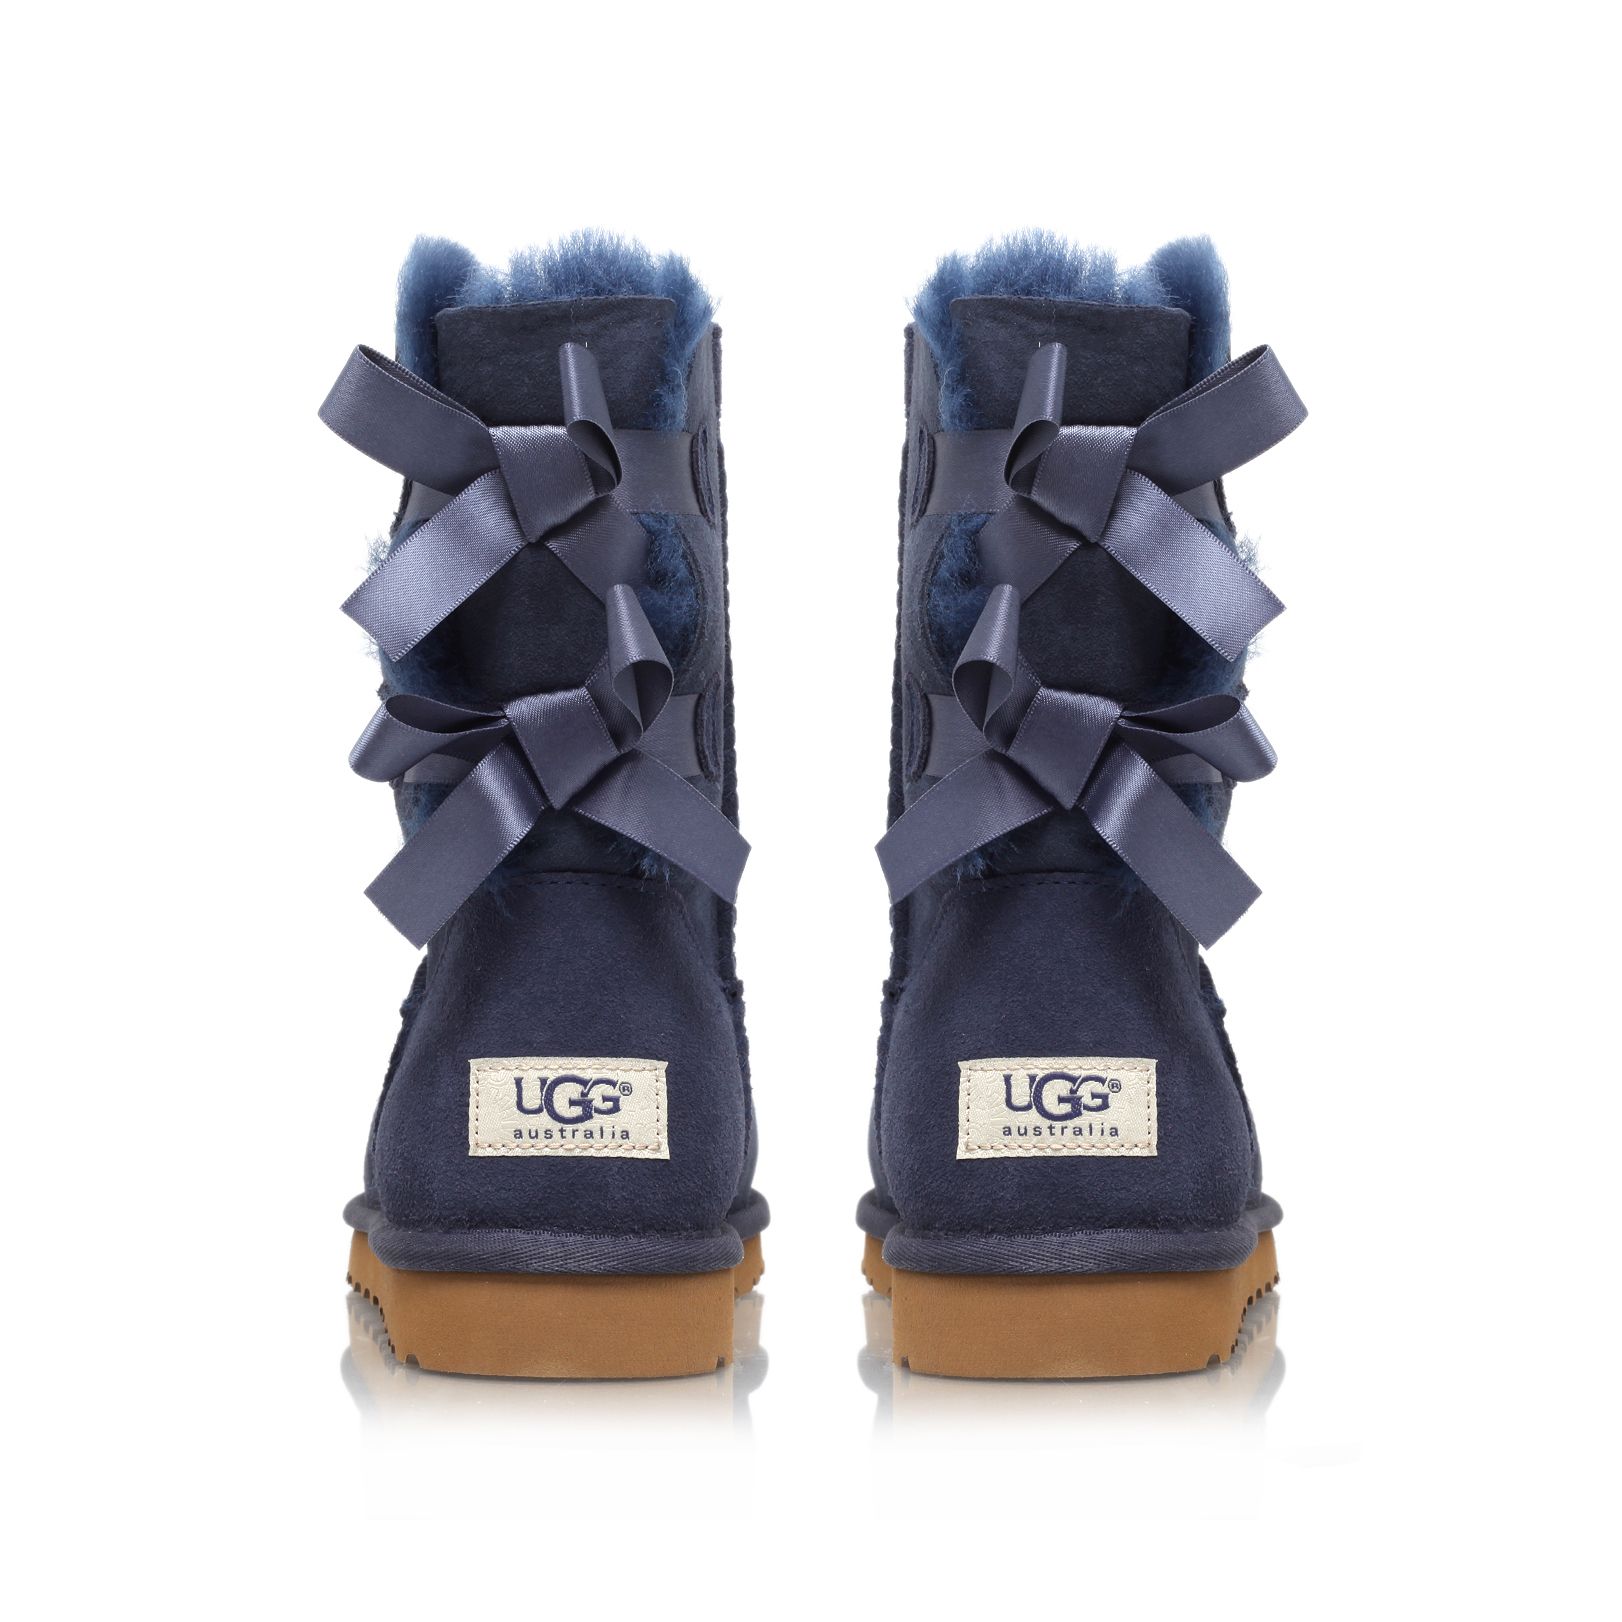 Best Deals for Ugg Bailey Bow Boots